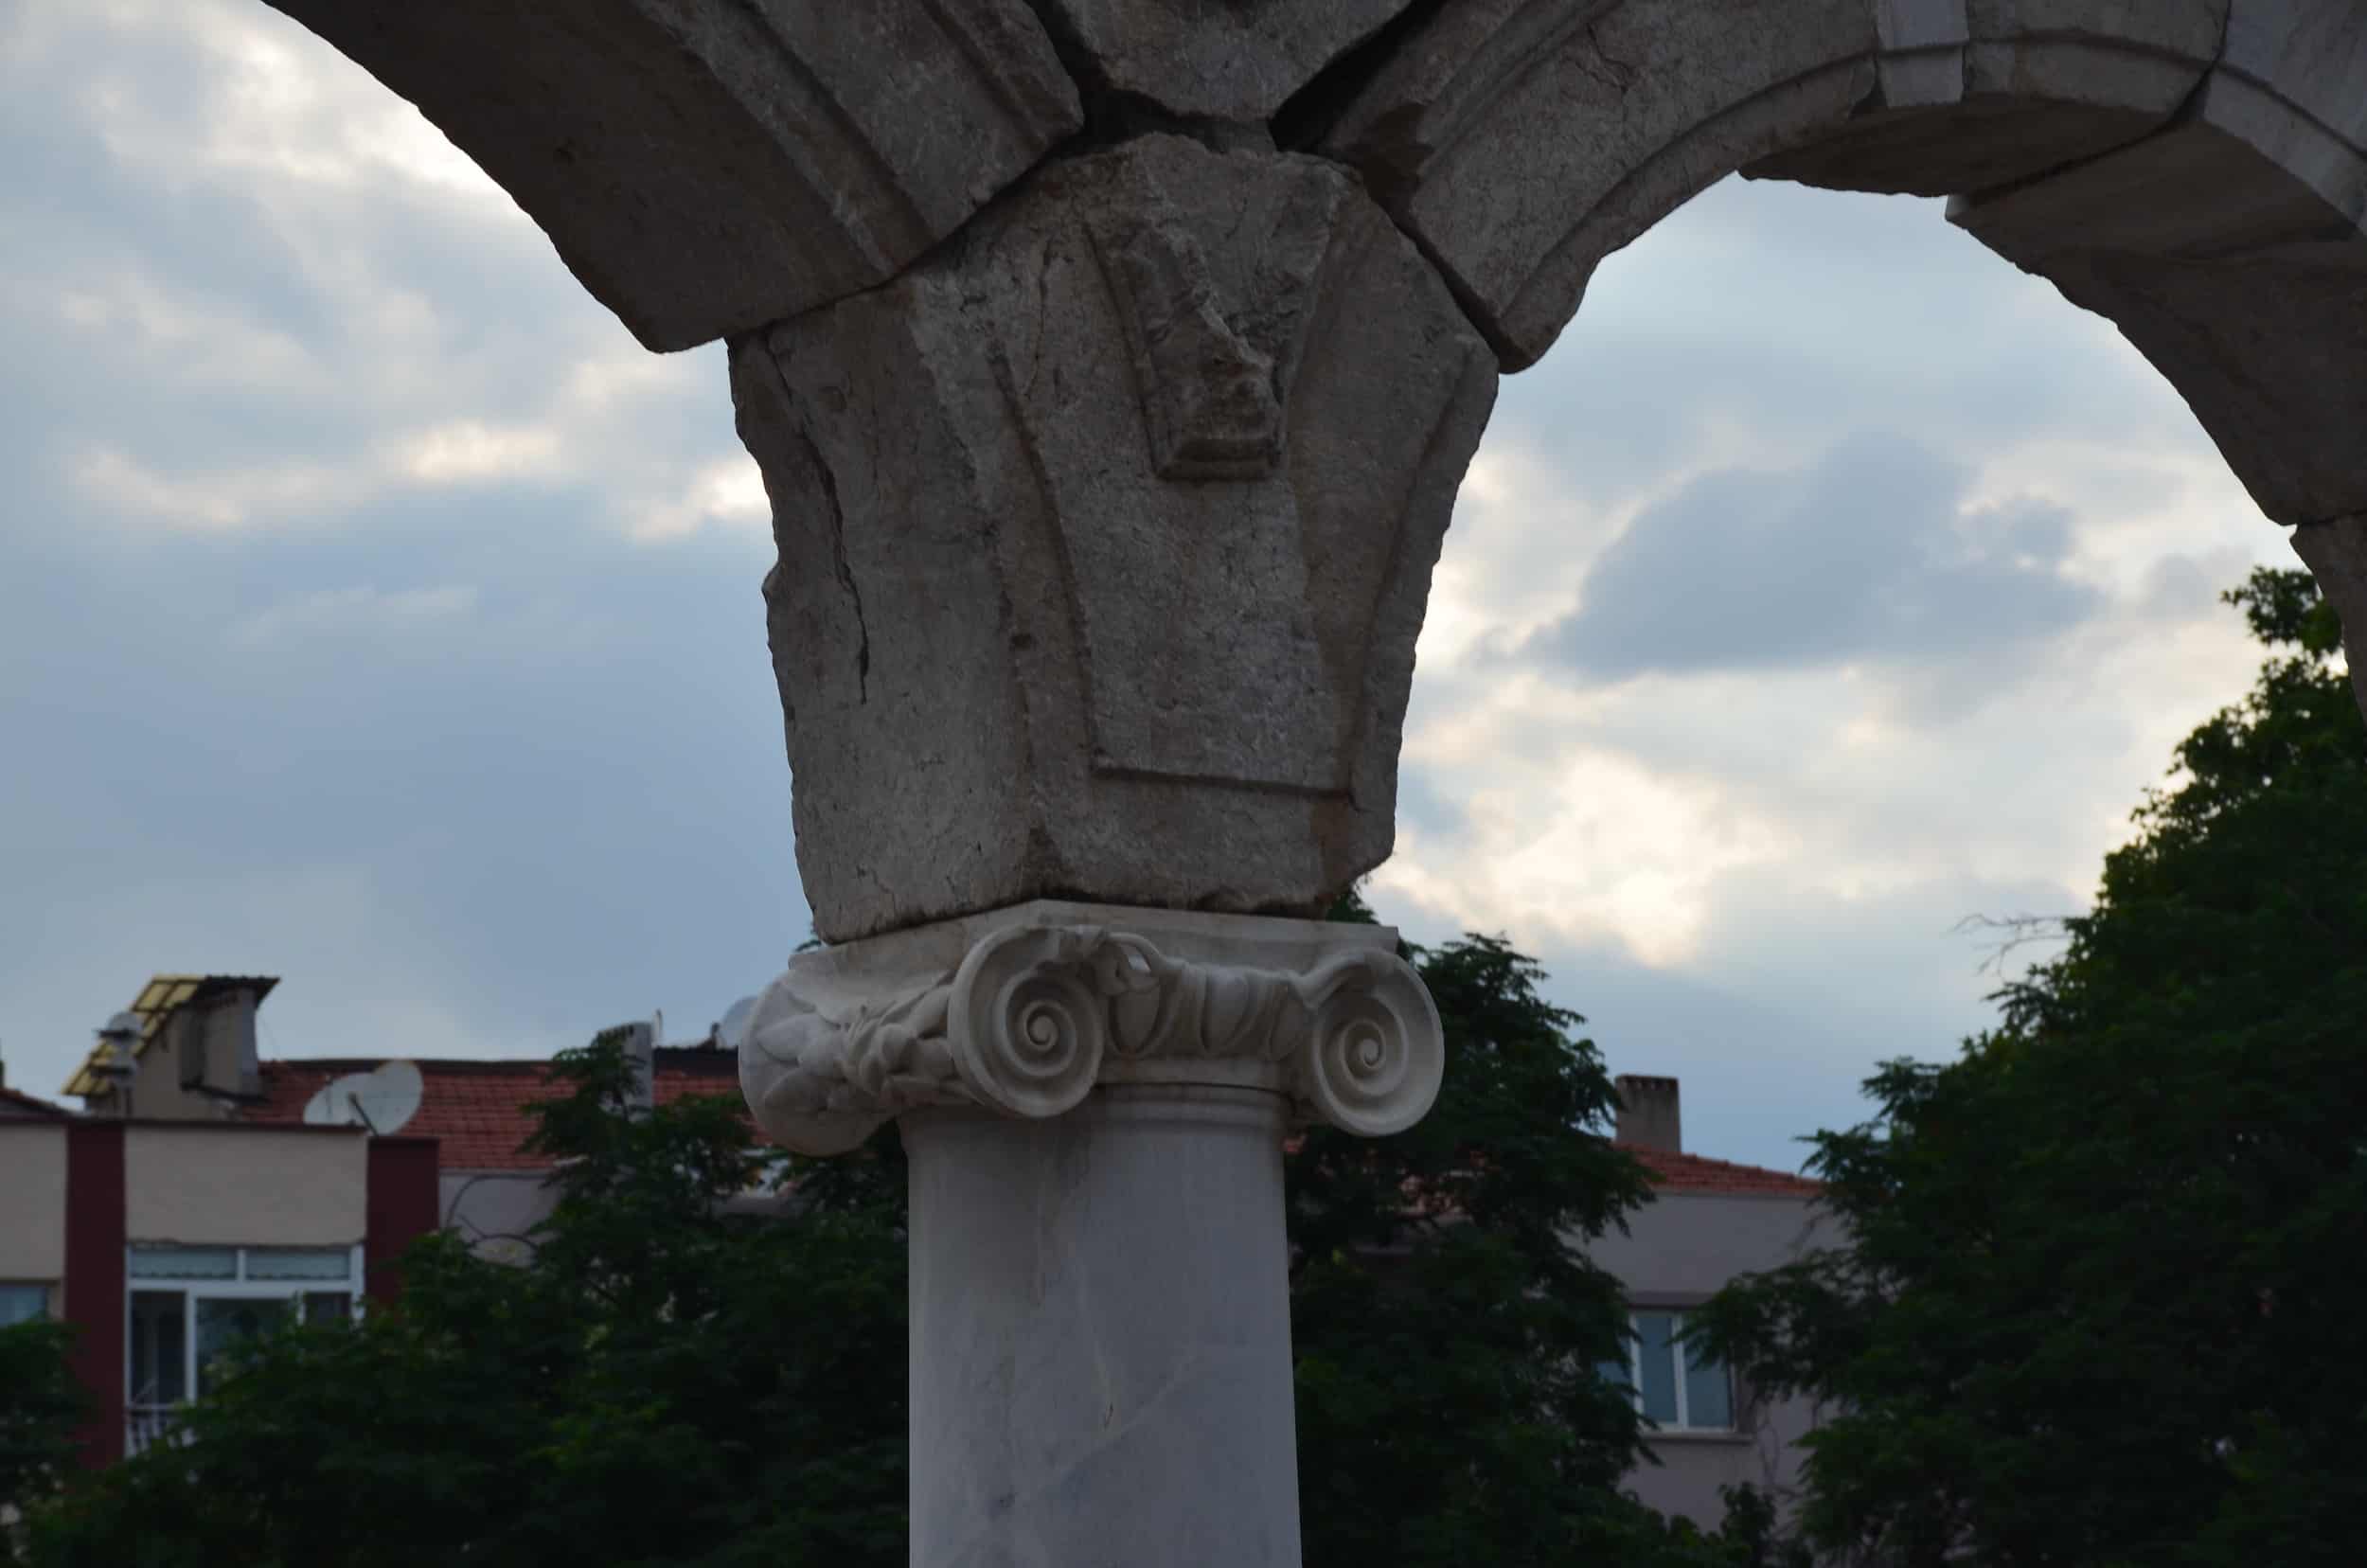 Detail of an arch on the colonnade